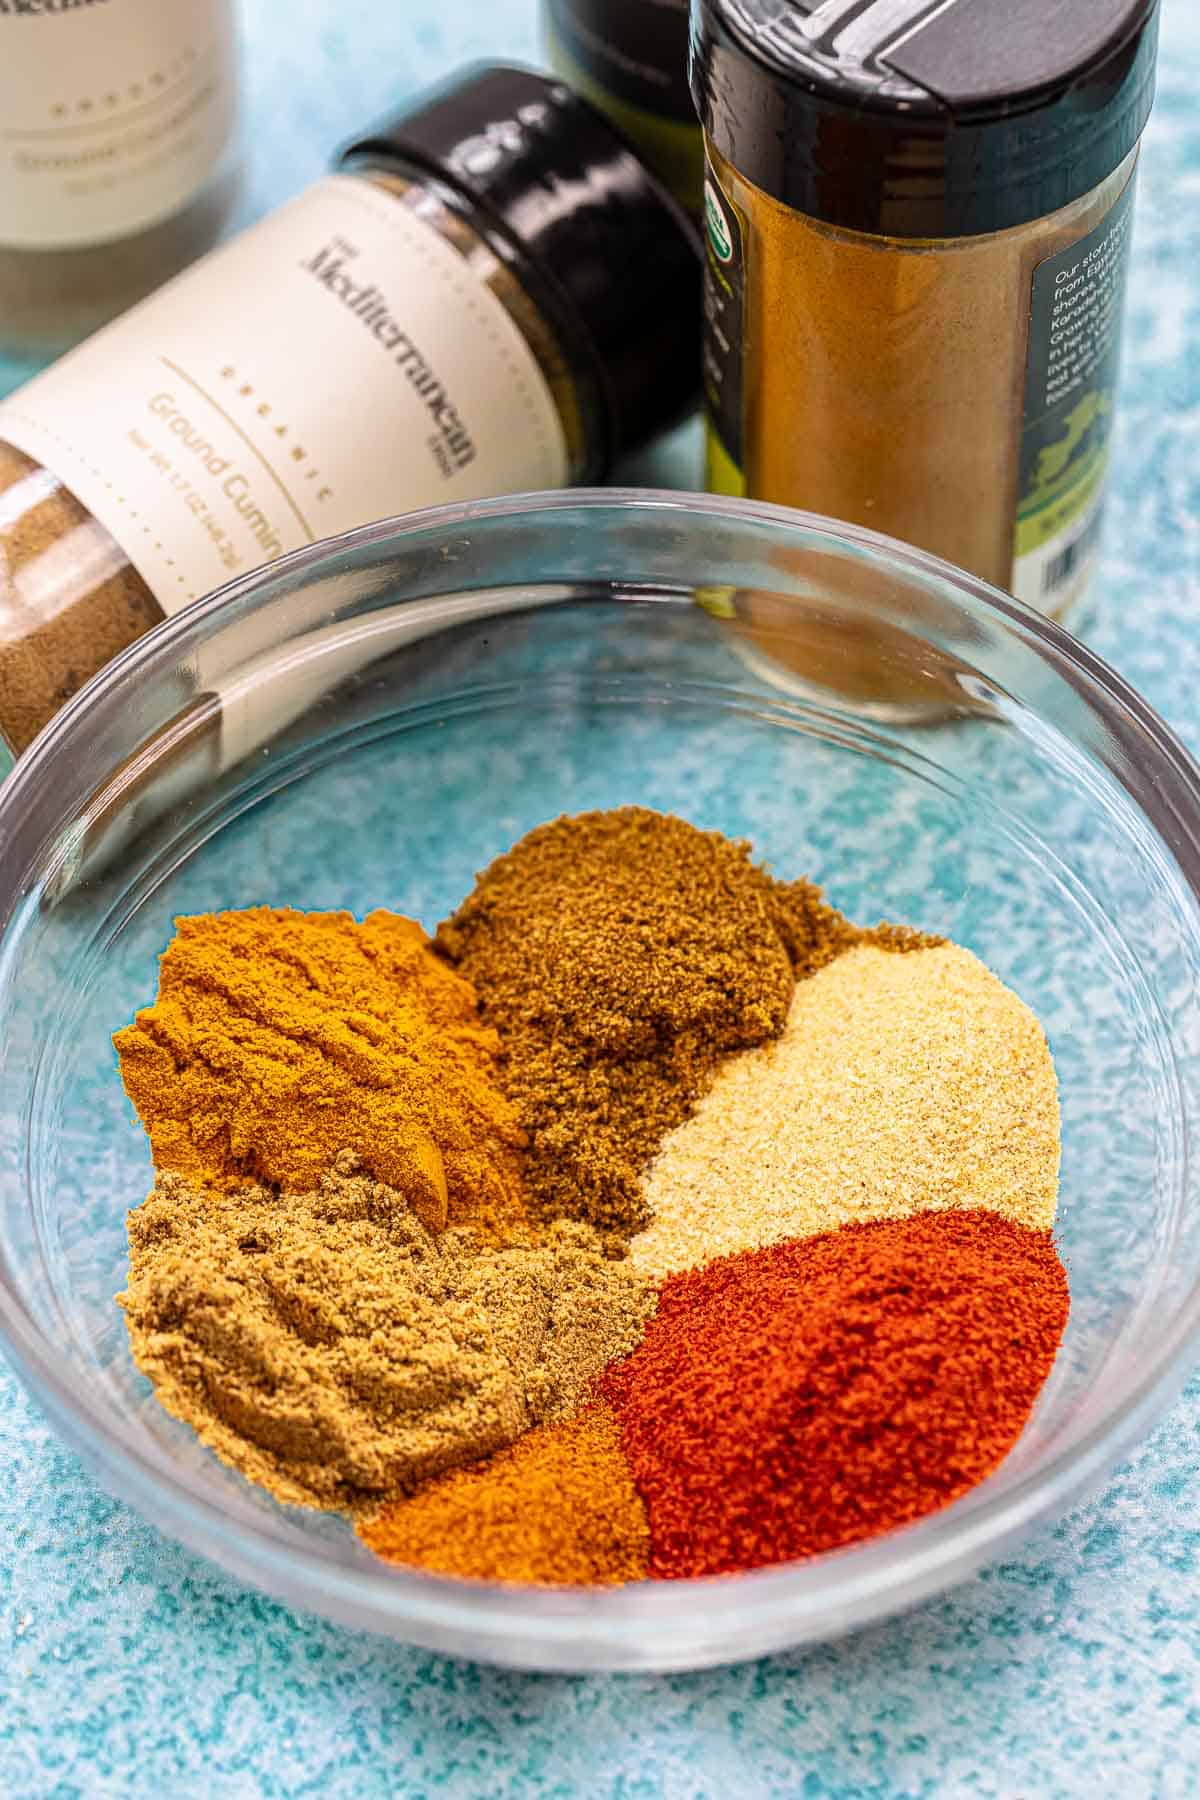 homemade shawarma spice blend including ground cumin, turmeric powder, ground coriander, garlic powder, sweet spanish paprika, ground cloves and cayenne pepper in a bowl next to a bottle of ground cumin and another spice.